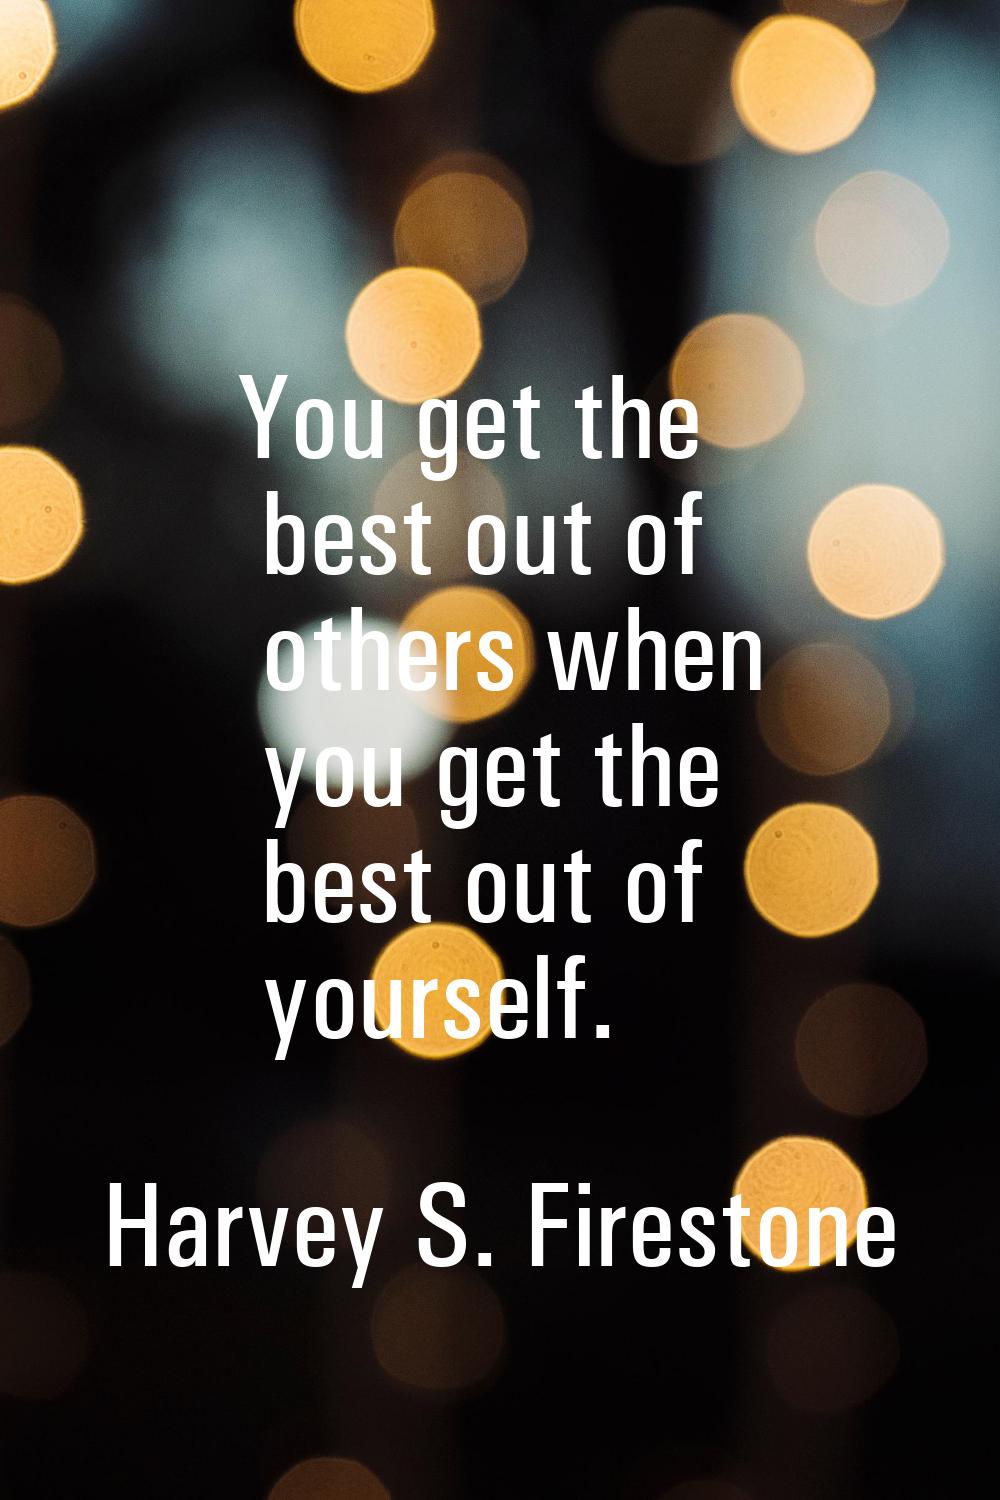 You get the best out of others when you get the best out of yourself.